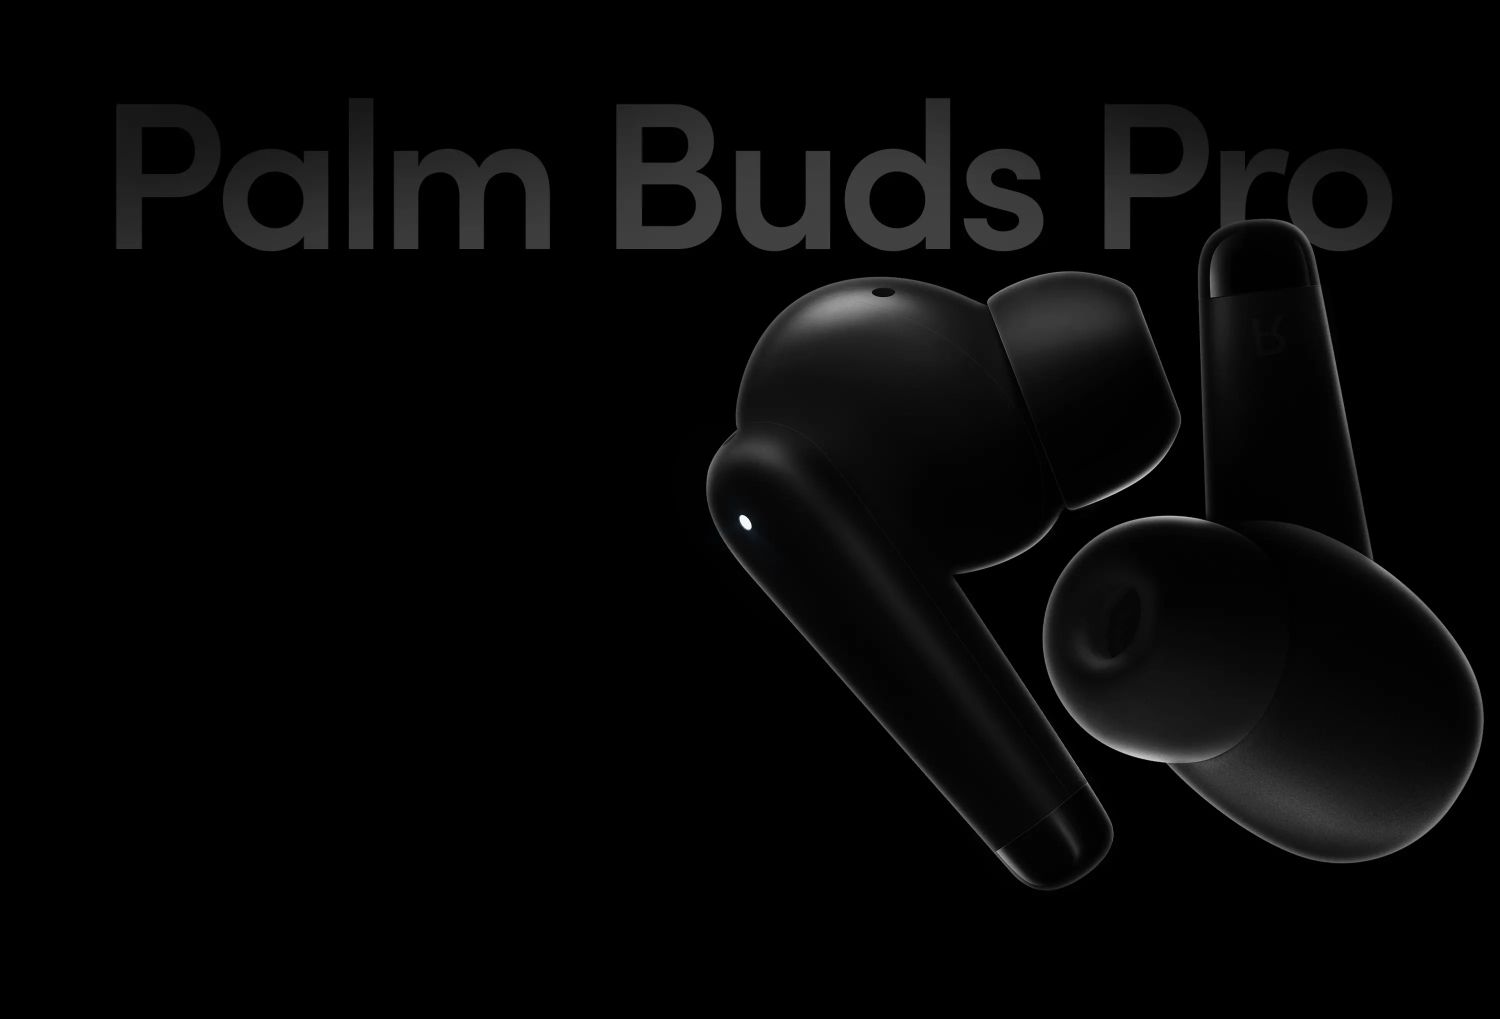 Palm Returns To The Scene With New Palm Buds Pro TWS Earbuds